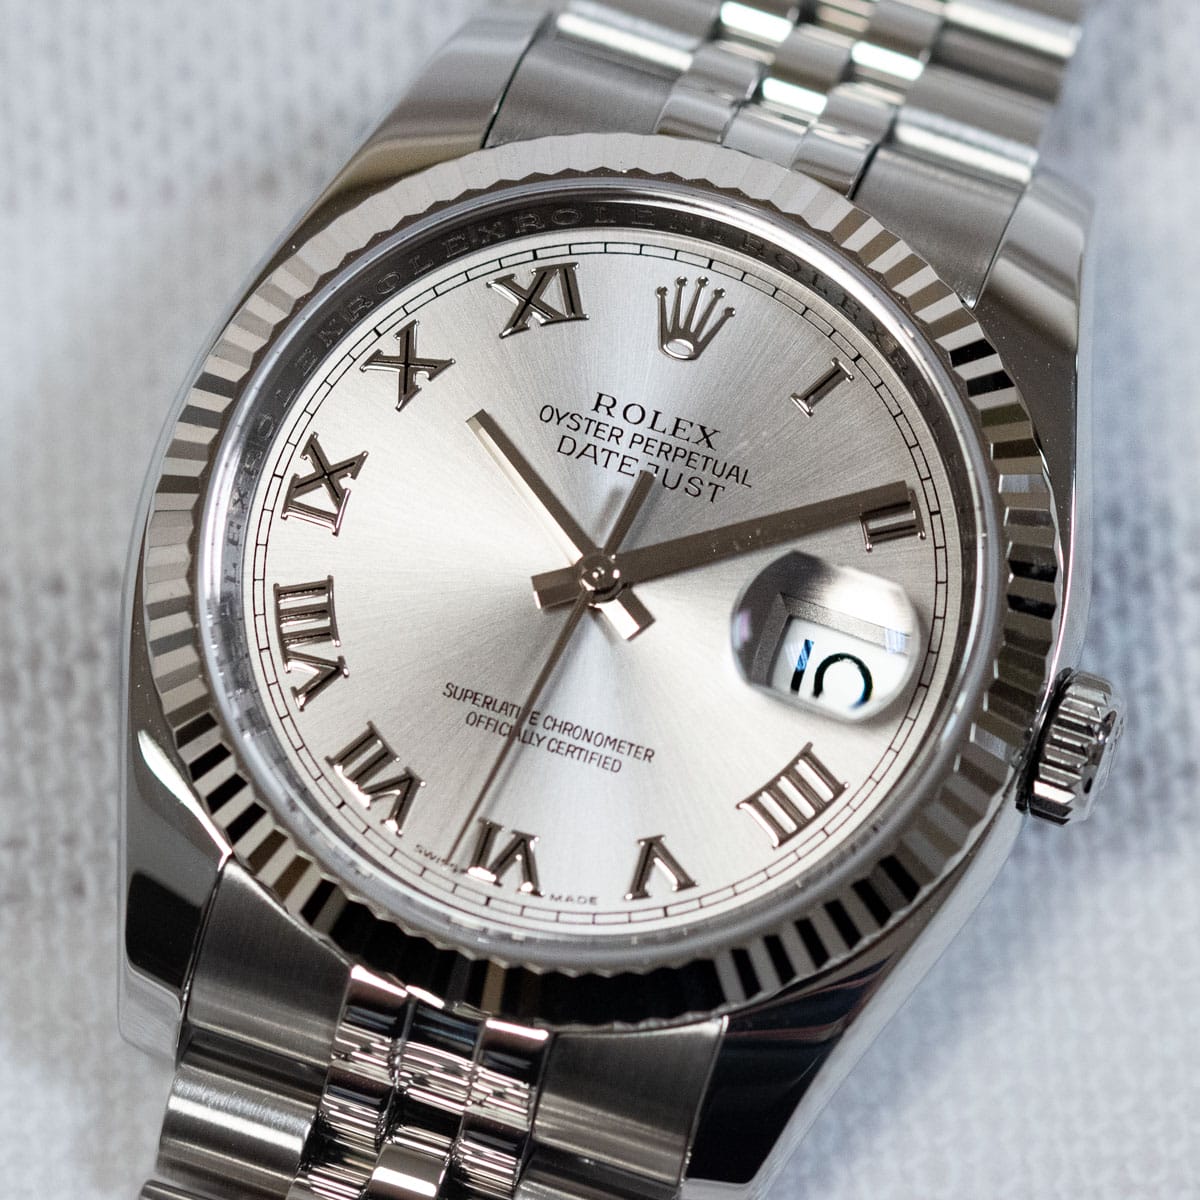 Stylied photo of  of Datejust 36